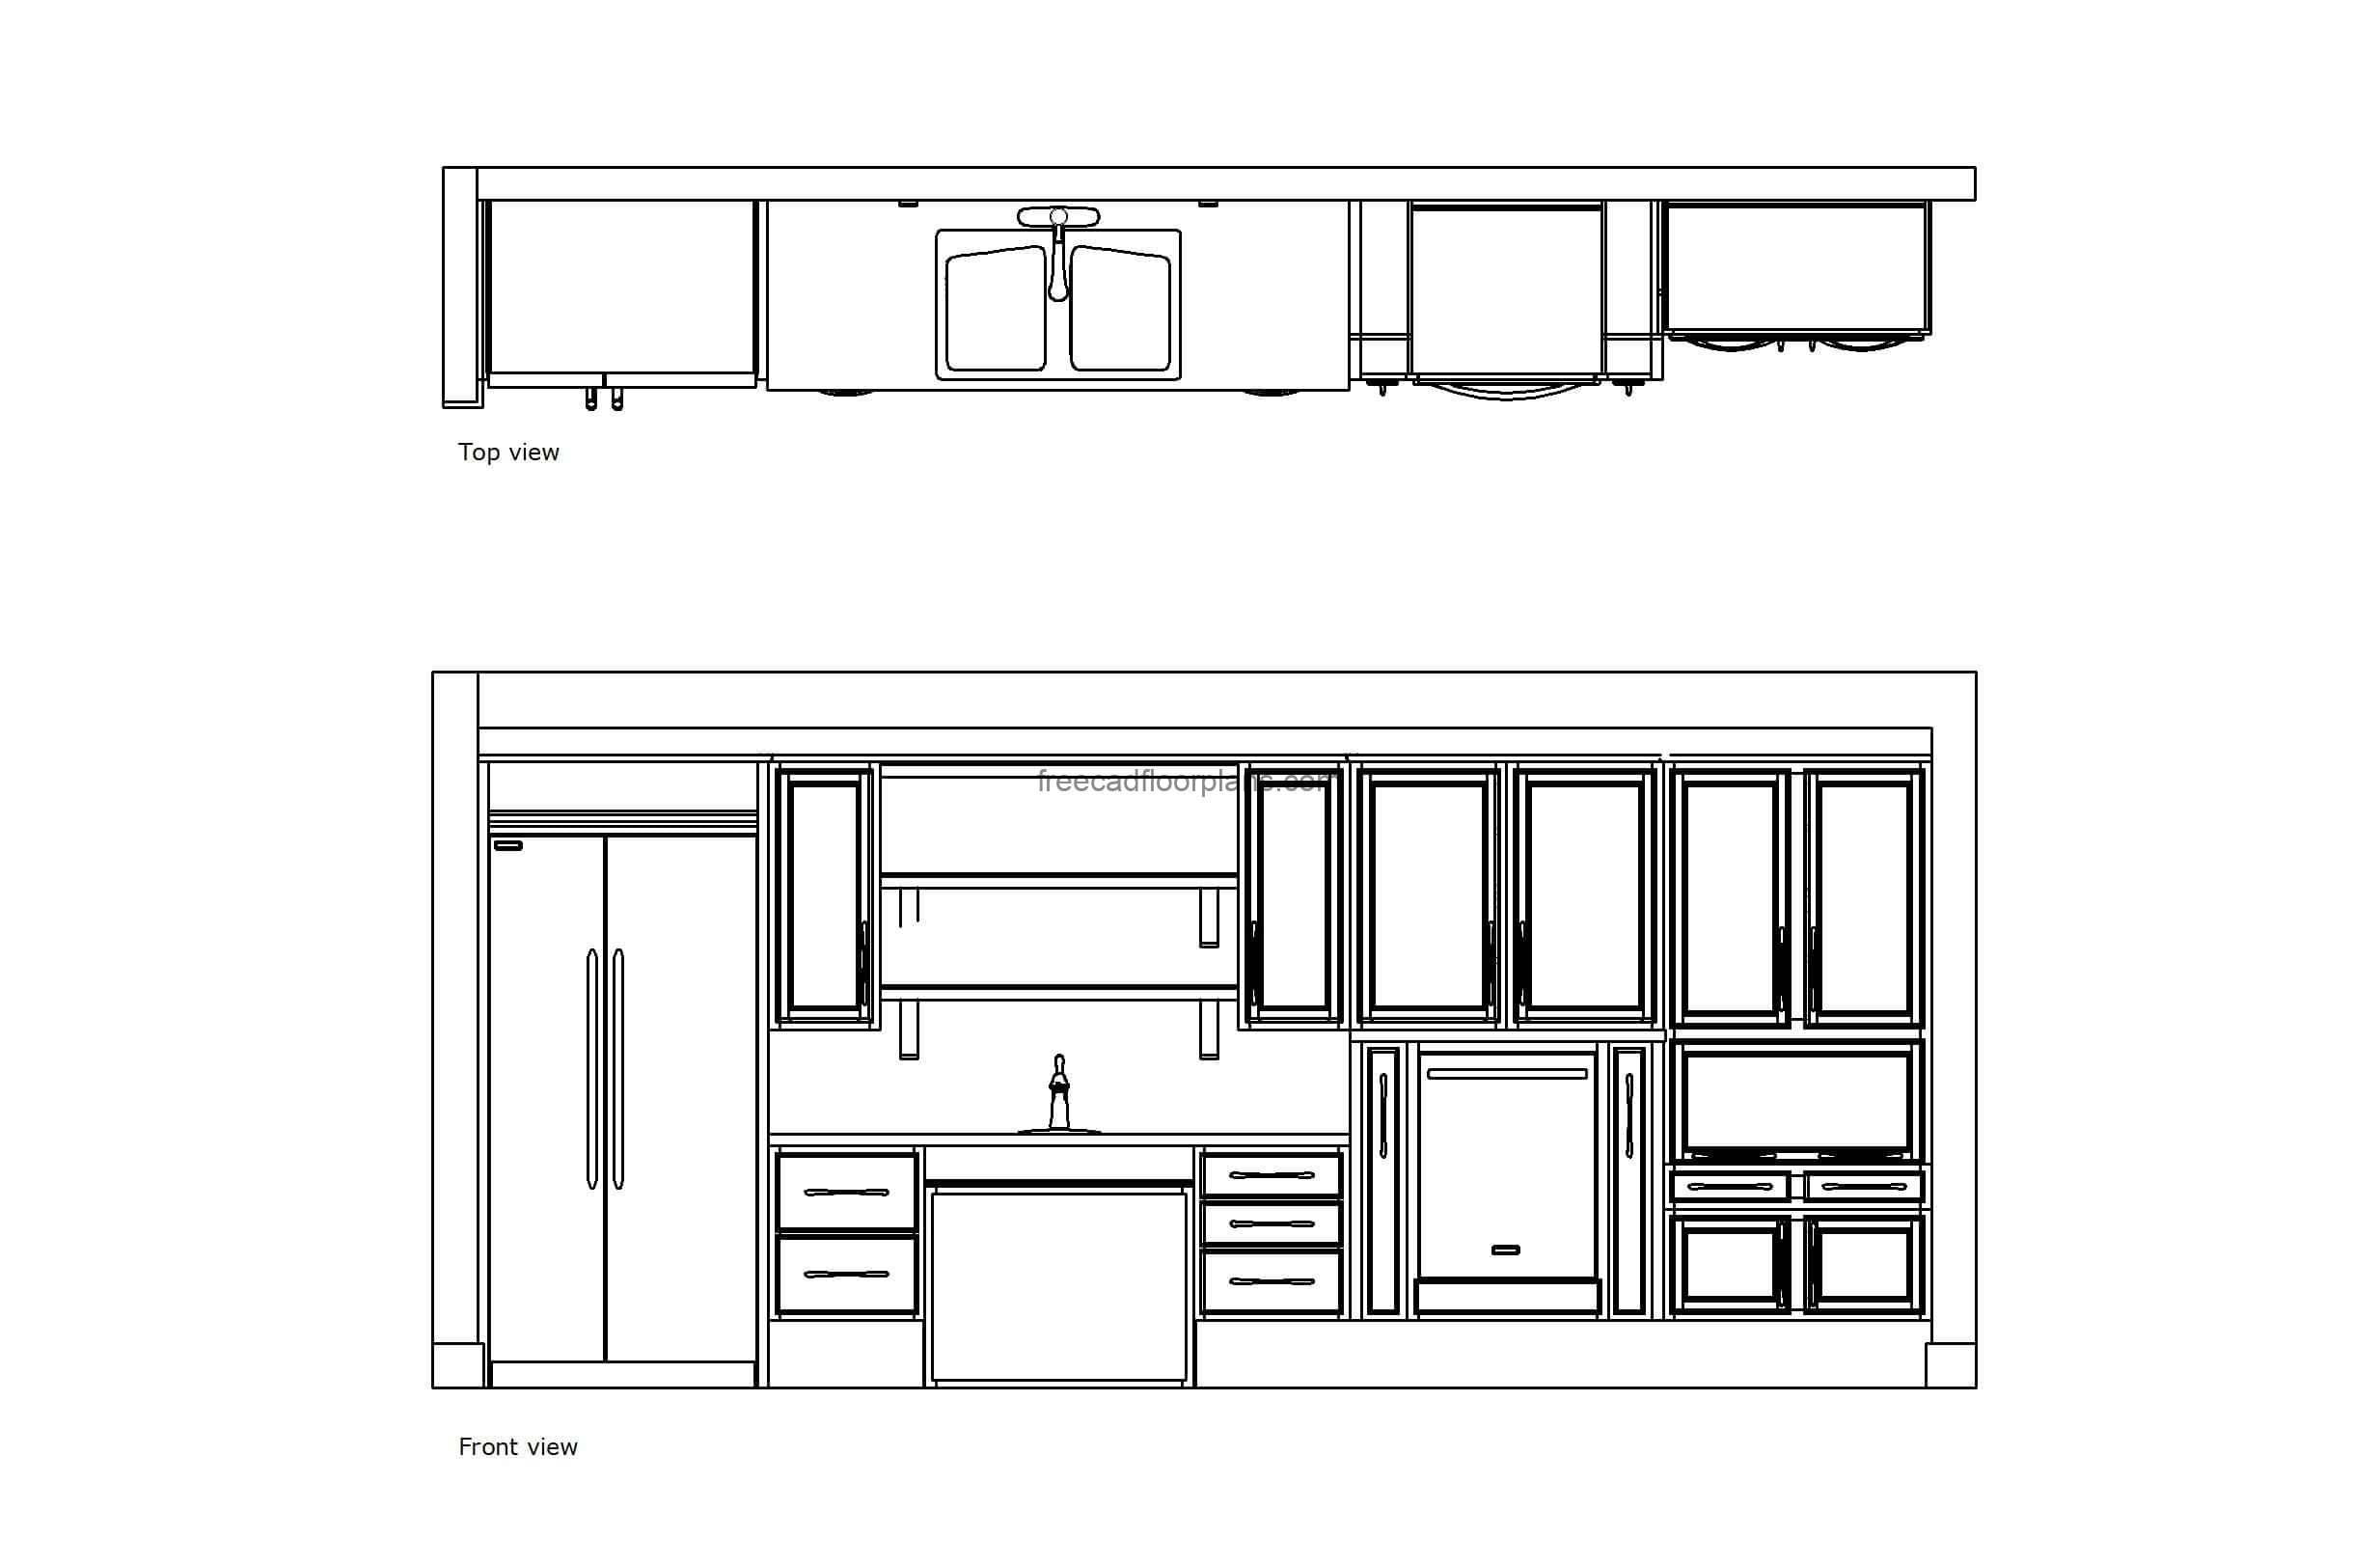 autocad drawing of an accesible kitchen, plan and elevation 2d views, dwg file free for download